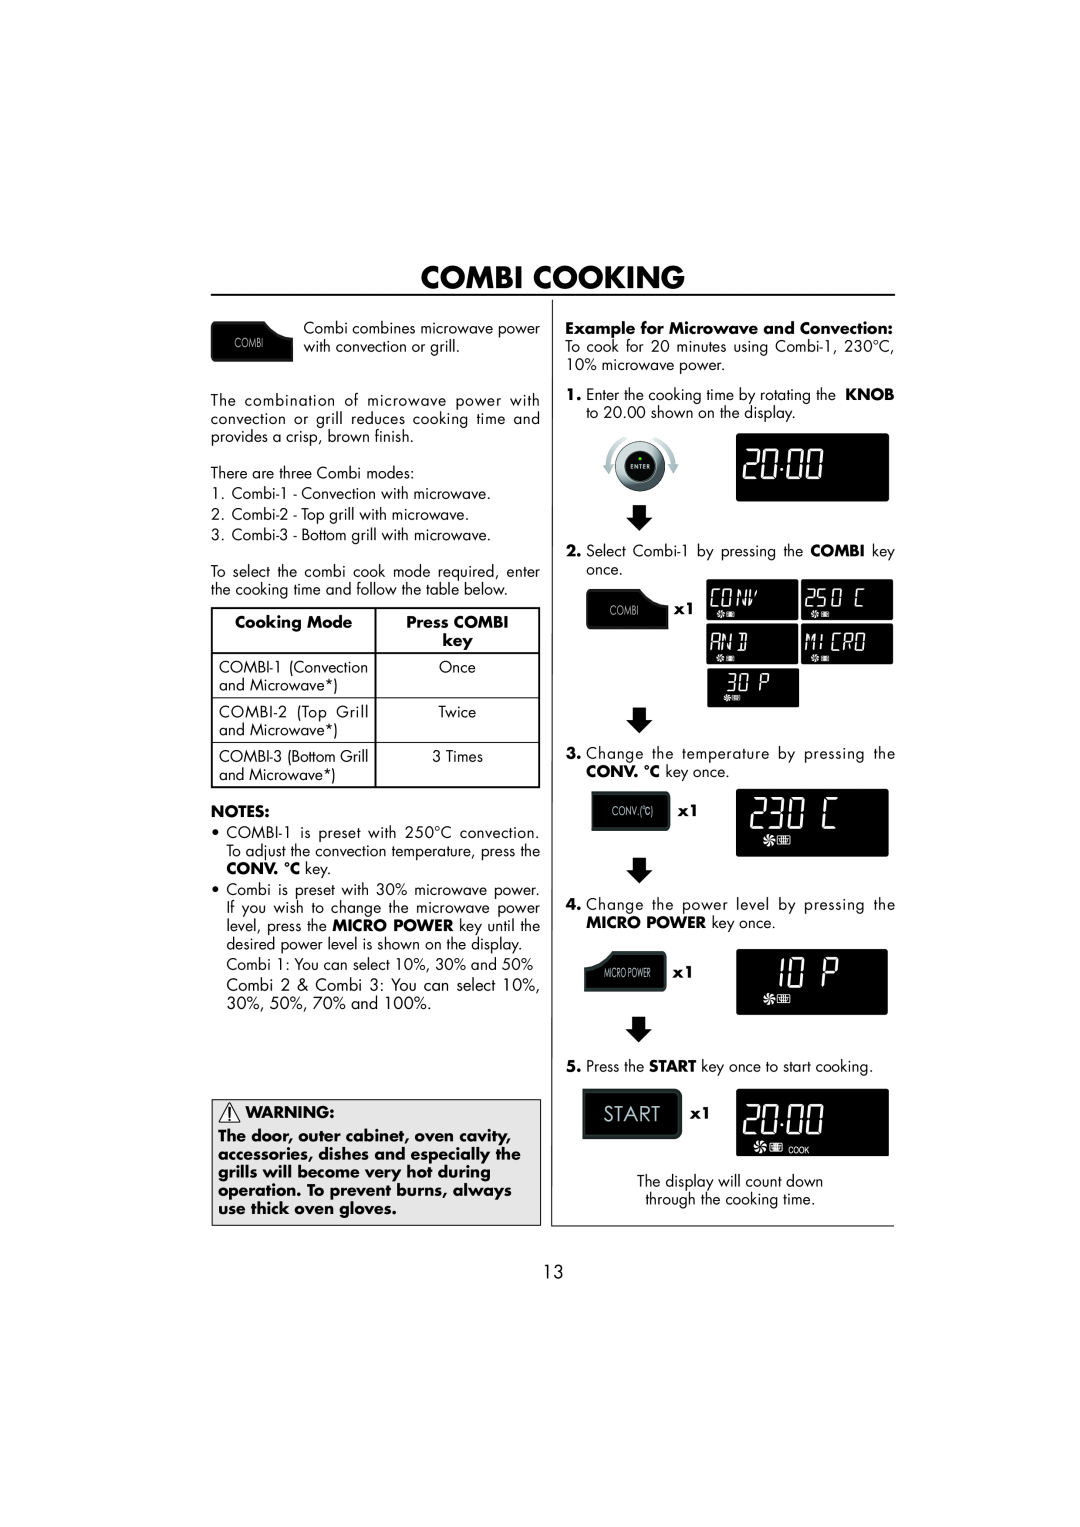 Sharp R-890SLM Combi Cooking, Combi 2 & Combi 3 You can select 10%, 30%, 50%, 70% and 100%, Cooking Mode, Press COMBI 